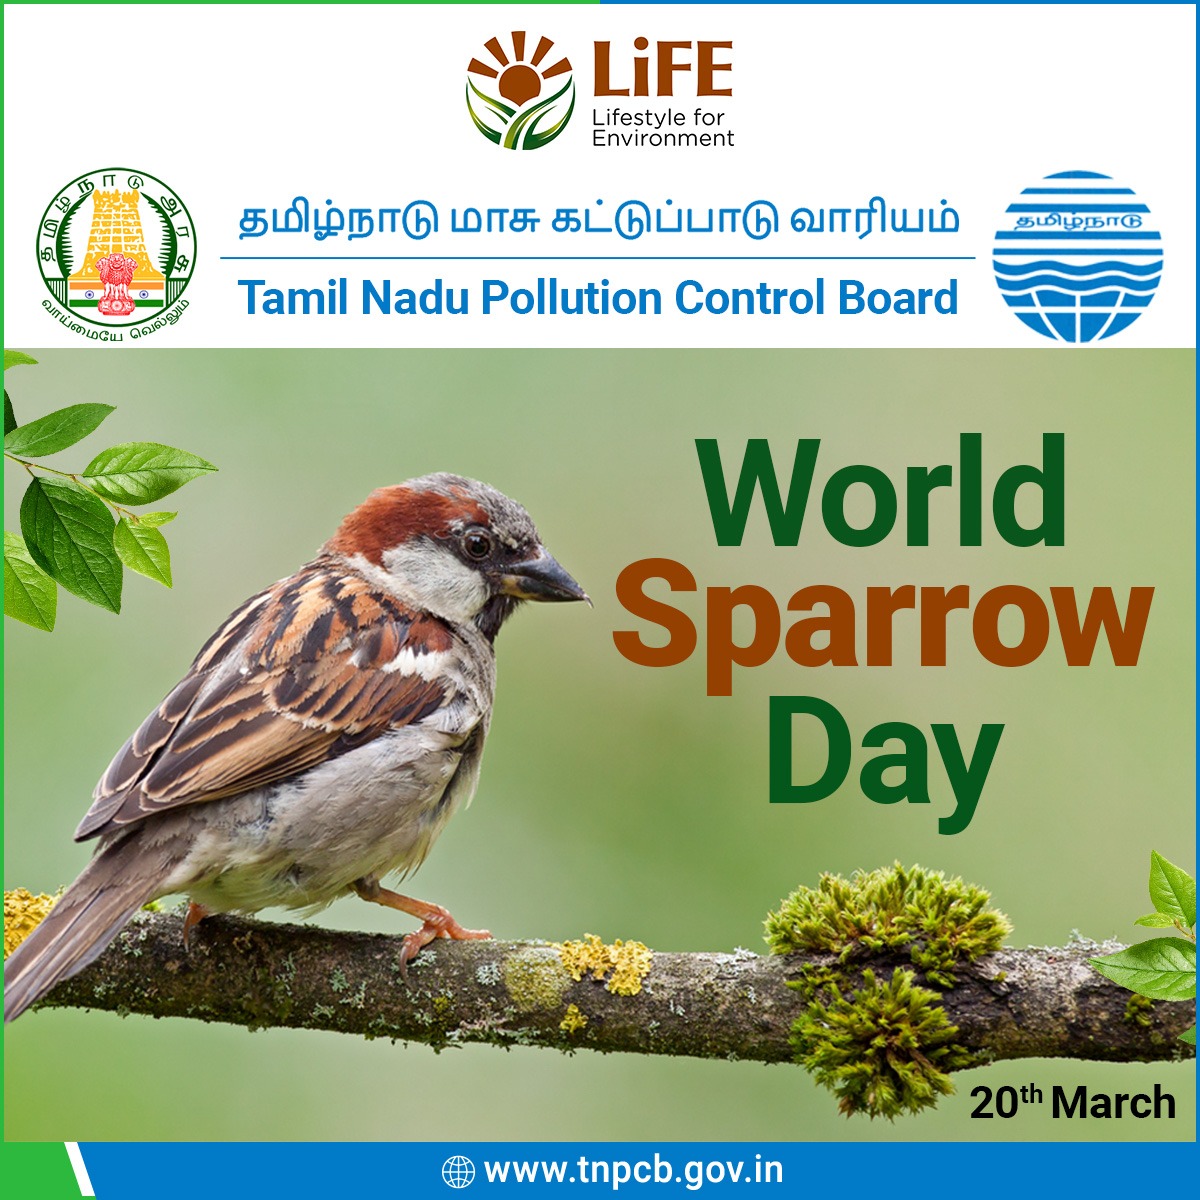 World Sparrow Day is observed globally on March 20th each year to raise awareness about conserving sparrows and their habitats. Pollution is also one of the factors in the significant decline of these birds. #TamilNaduPollutionControlBoard #TNPCB #WorldSparrowDay #ProtectNature